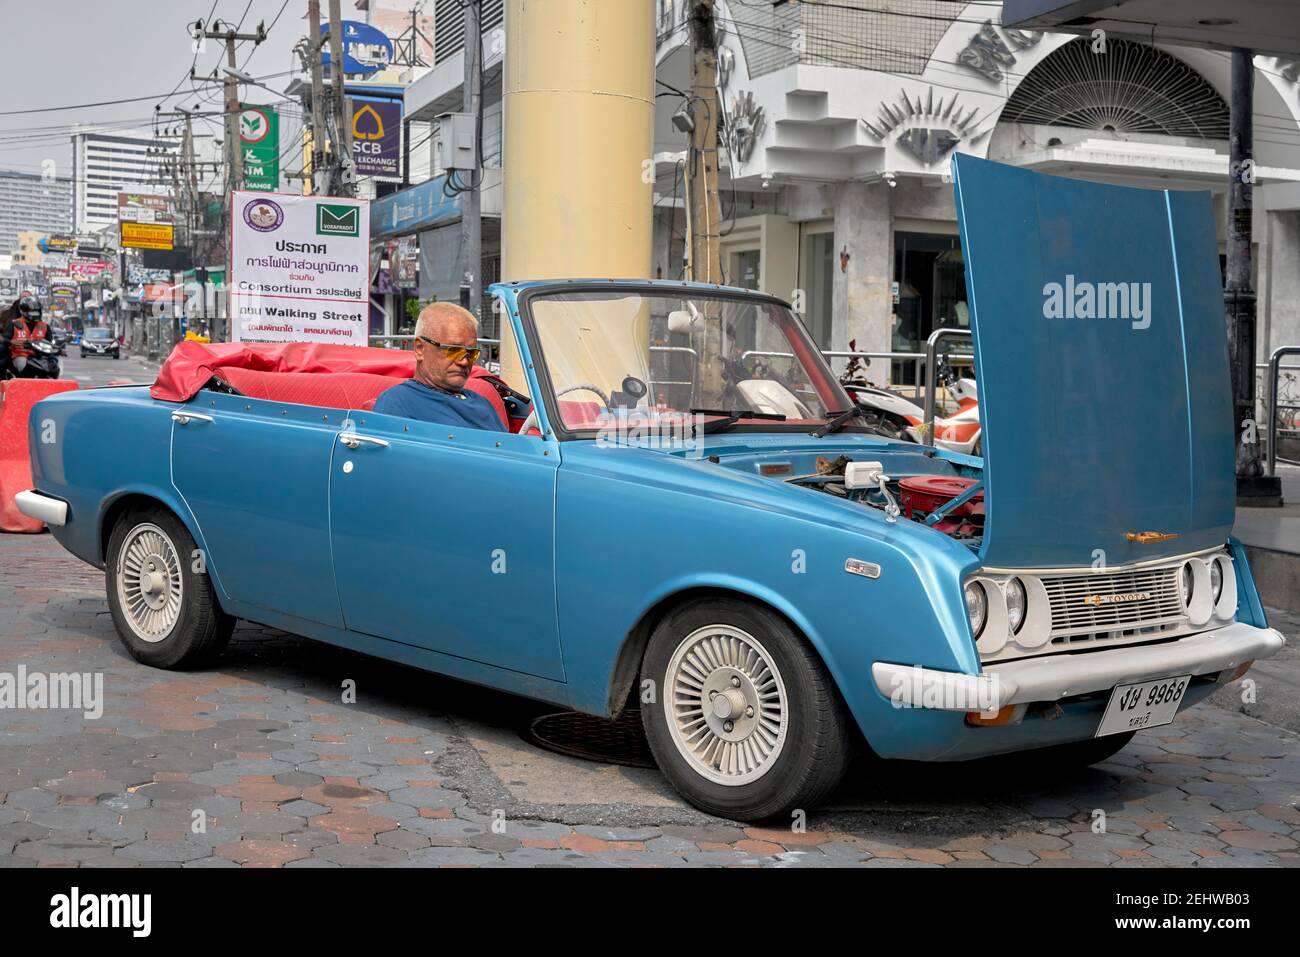 Toyota Corona convertible.  Rare convertible version of a vintage 1960s 4 door drop head car in sky blue with red interior. full length side view Stock Photo